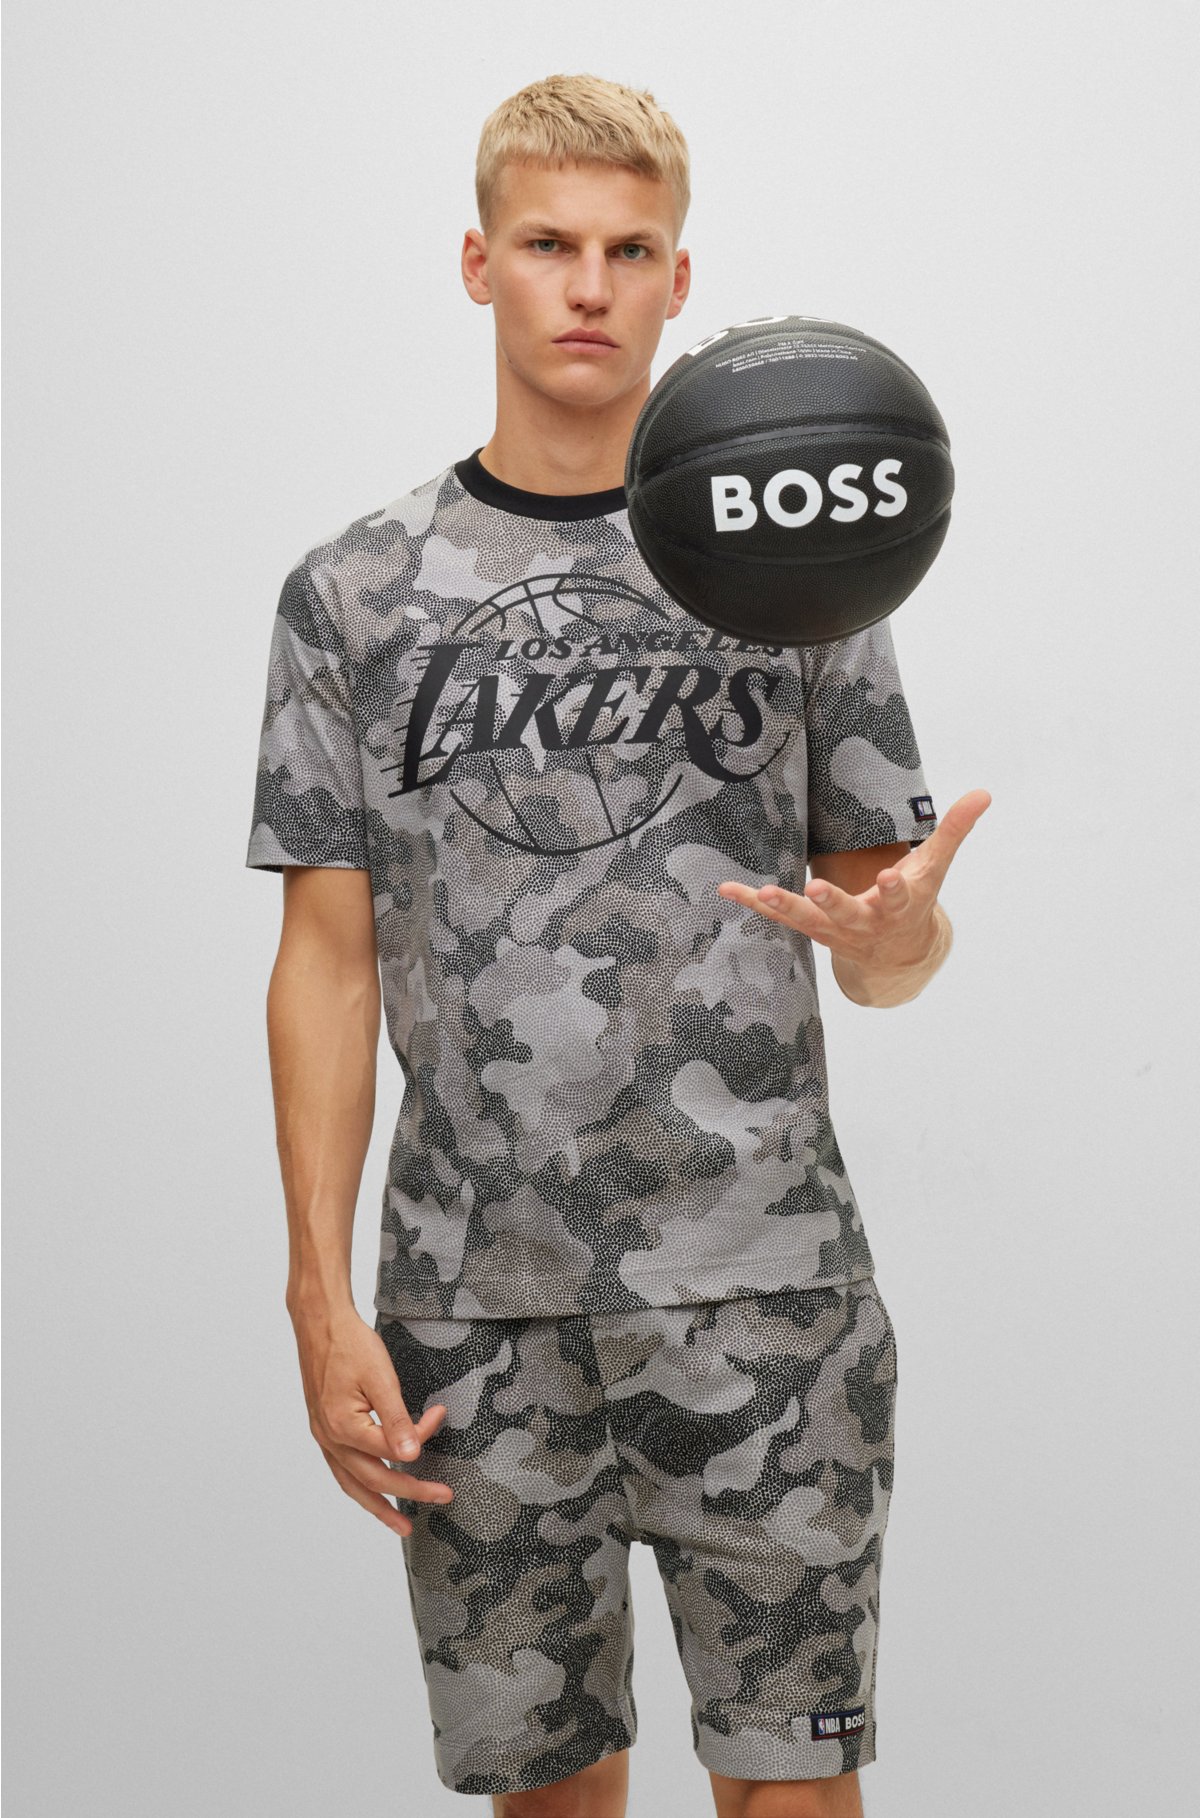 NBA's coolest accessories - headgear - Basketball Network - Your daily dose  of basketball